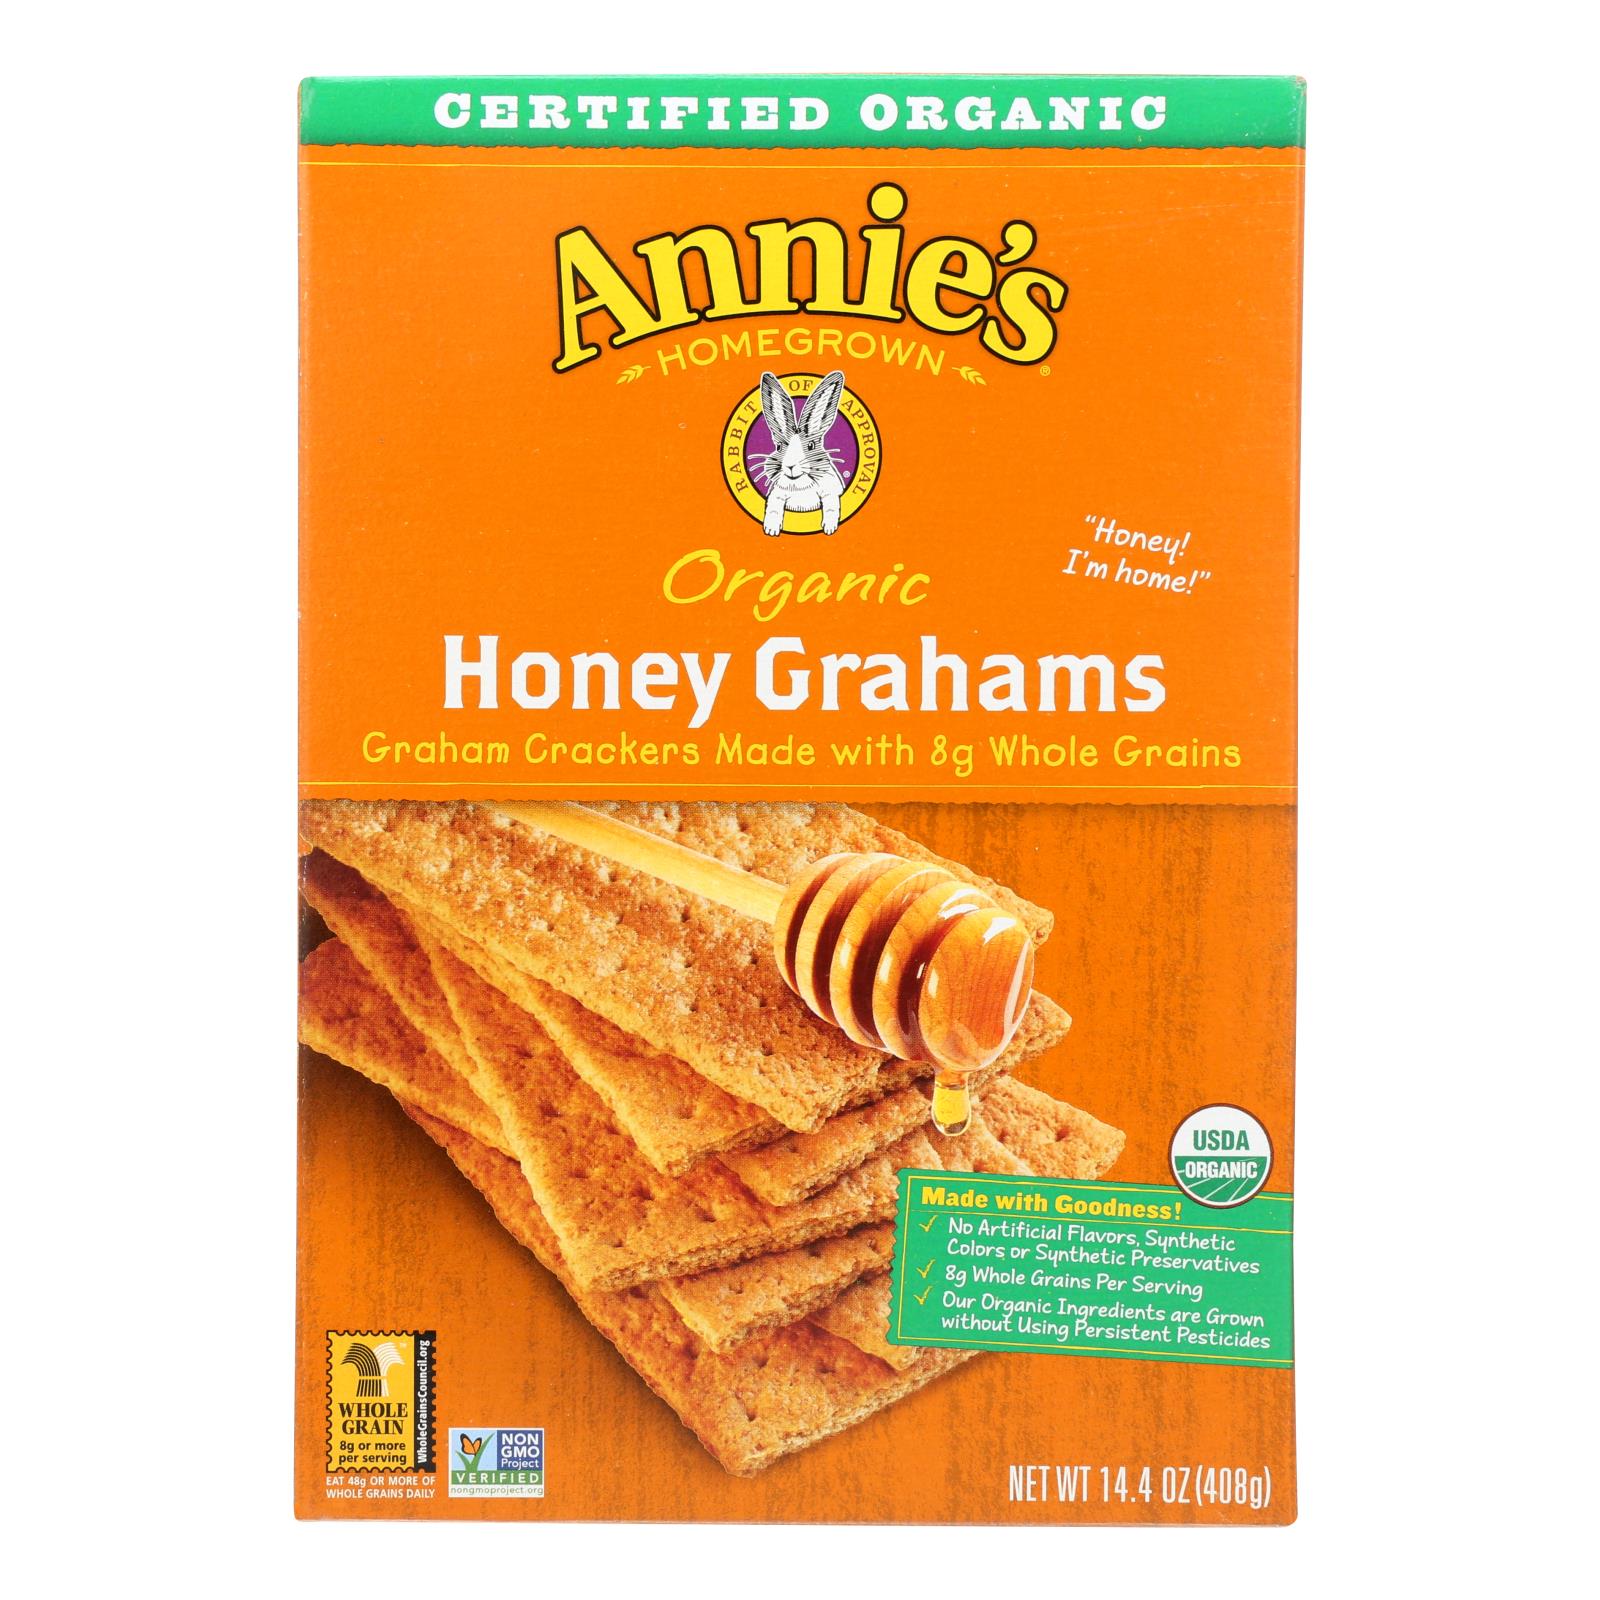 Annie'S Homegrown, Annie's Homegrown Organic Honey Graham Crackers - Case of 12 - 14.4 oz. (Pack of 12)